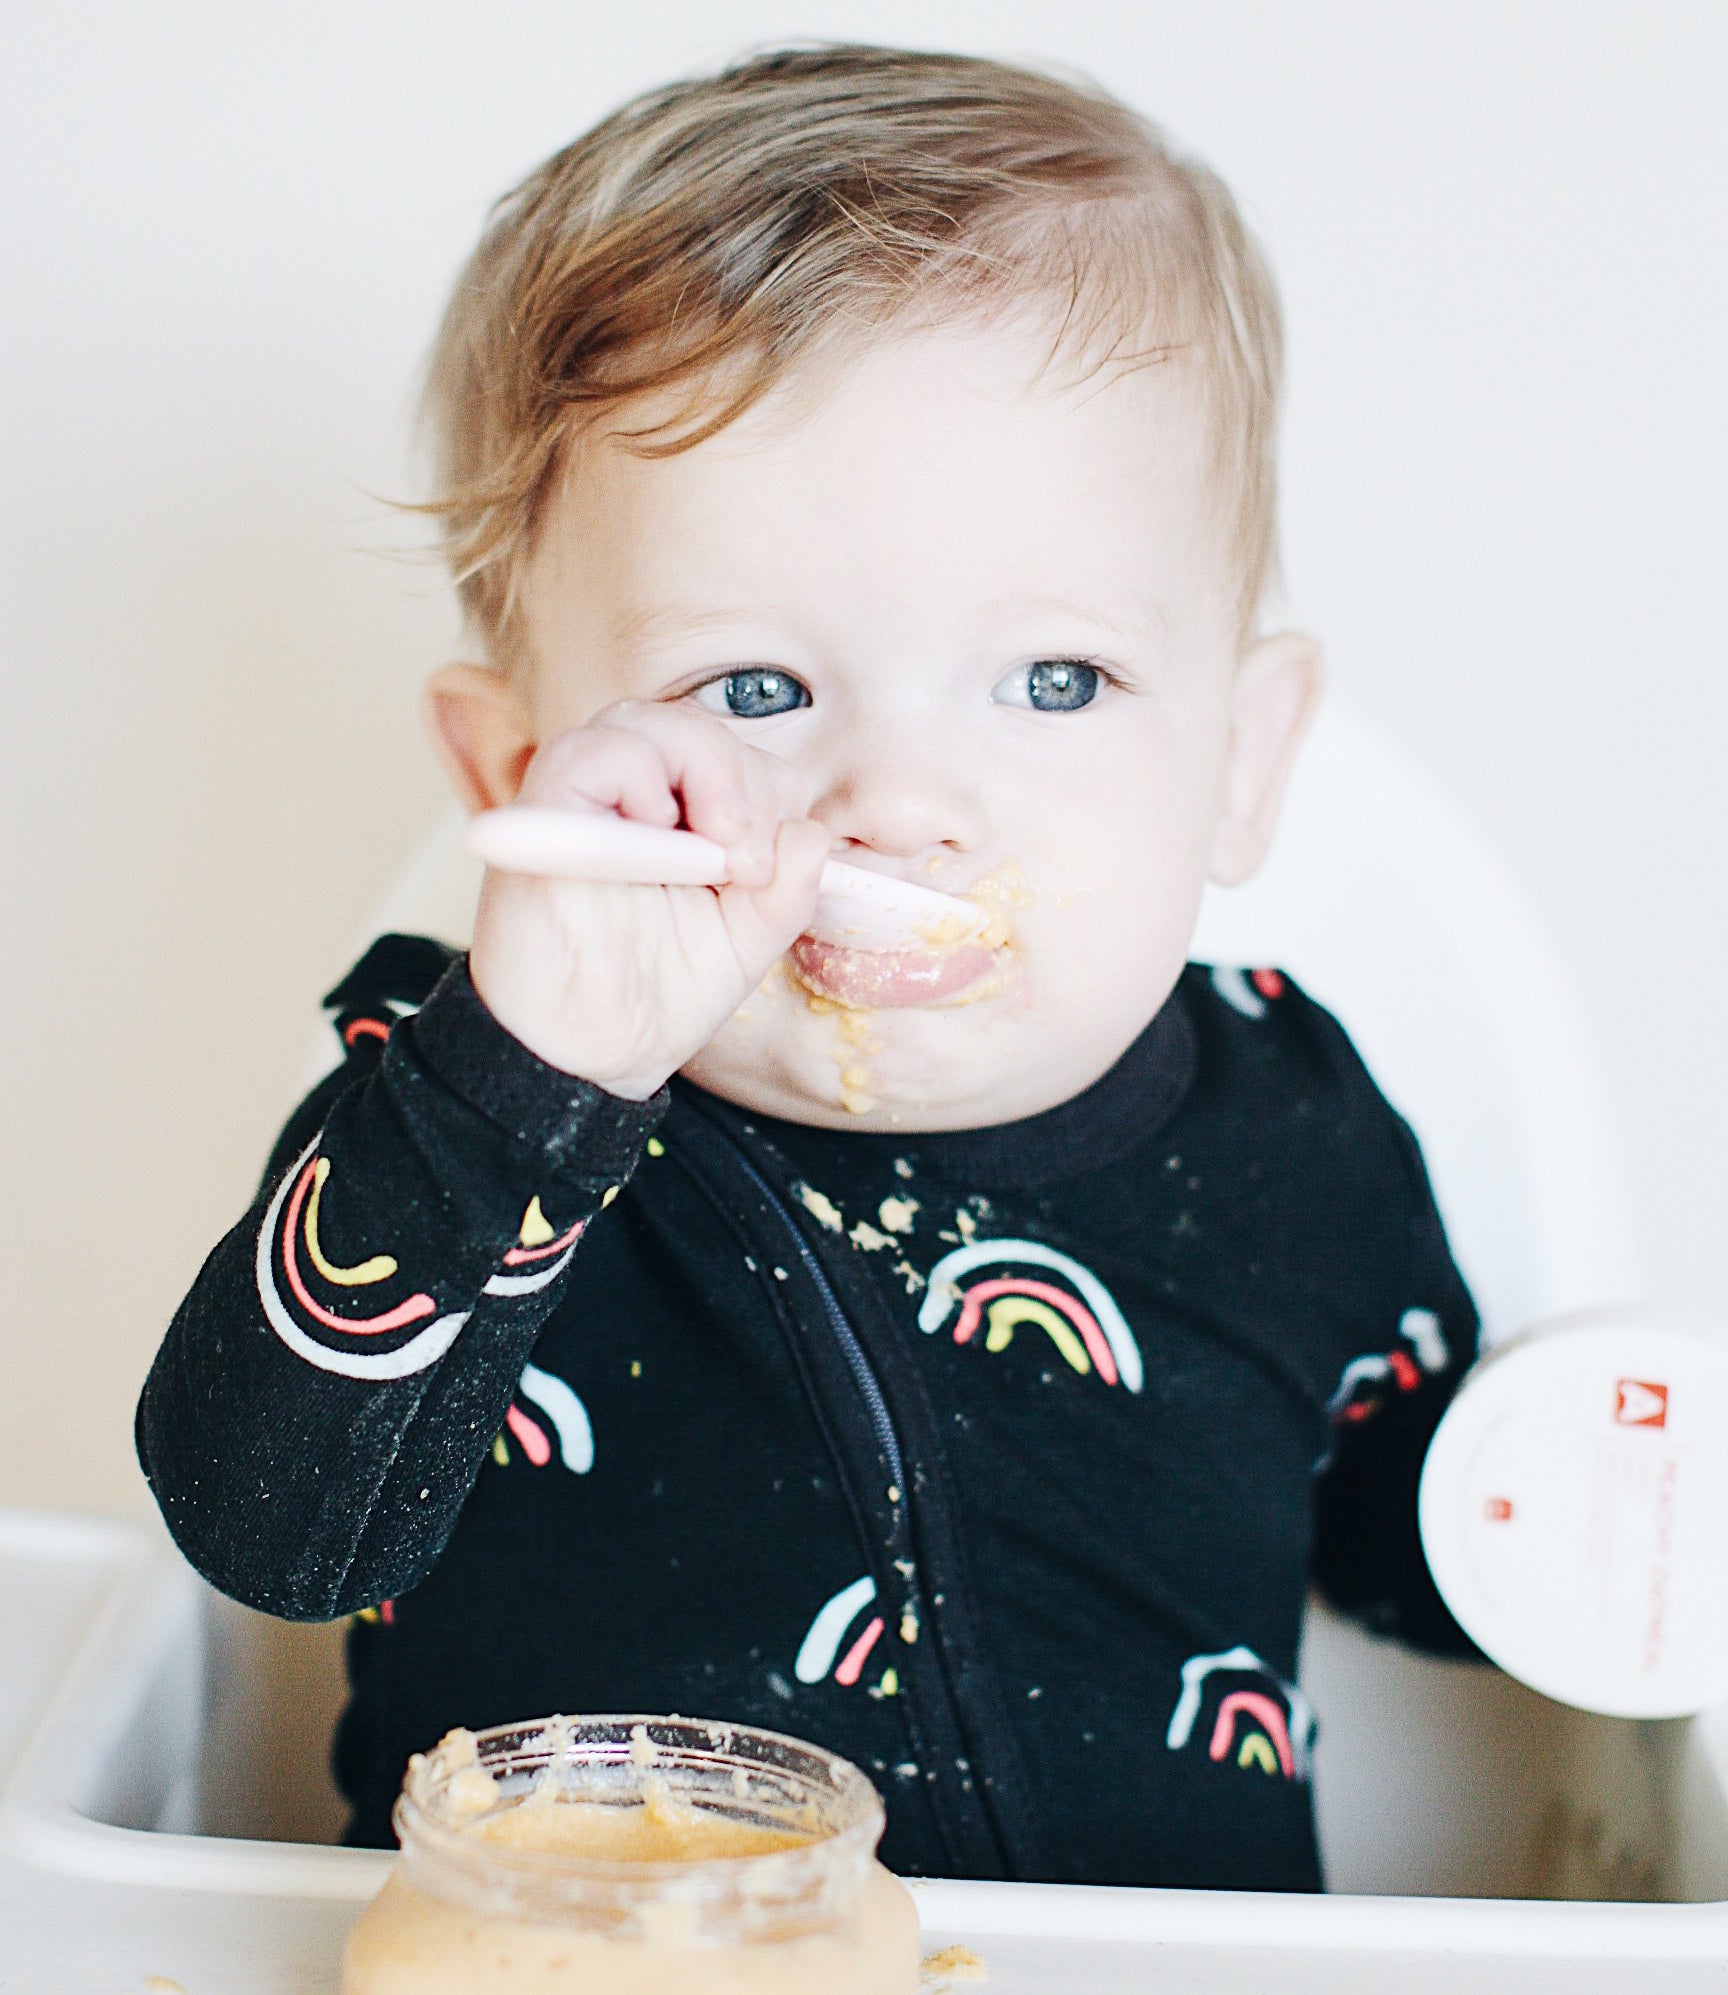 Baby eating from a spoon - Square Baby